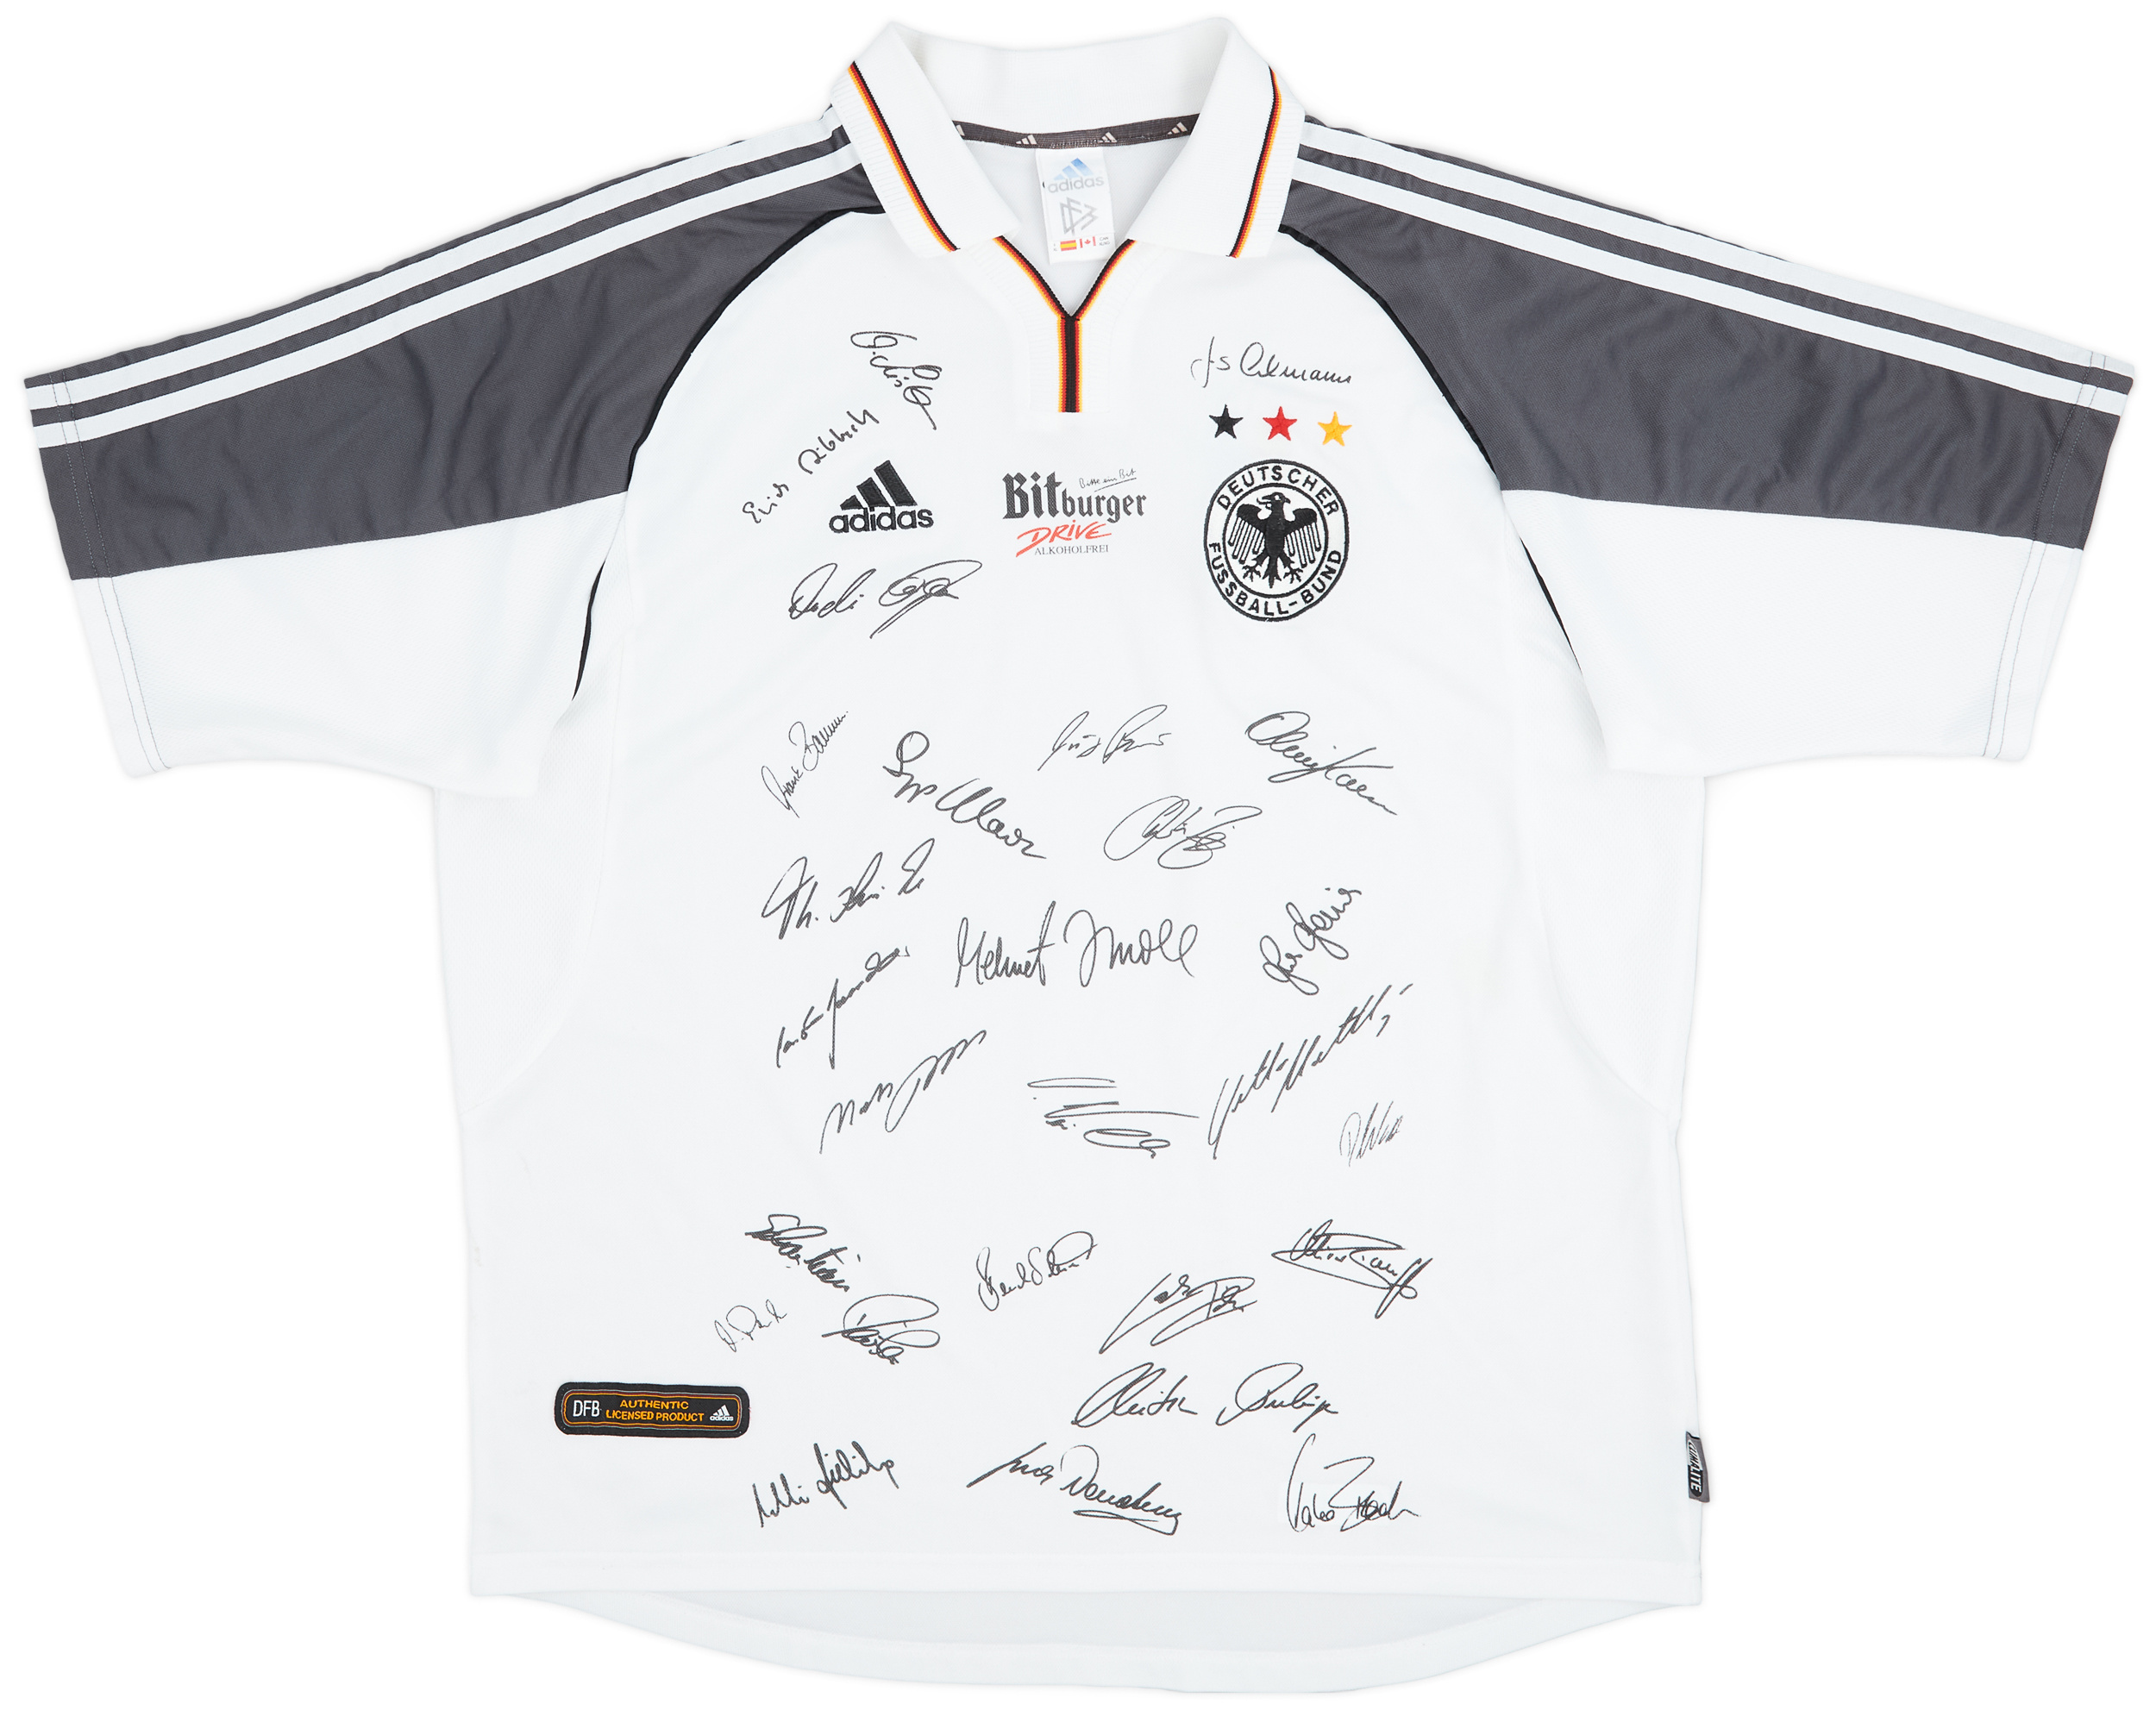 2000-02 Germany 'Signed' Home Shirt - 9/10 - ()